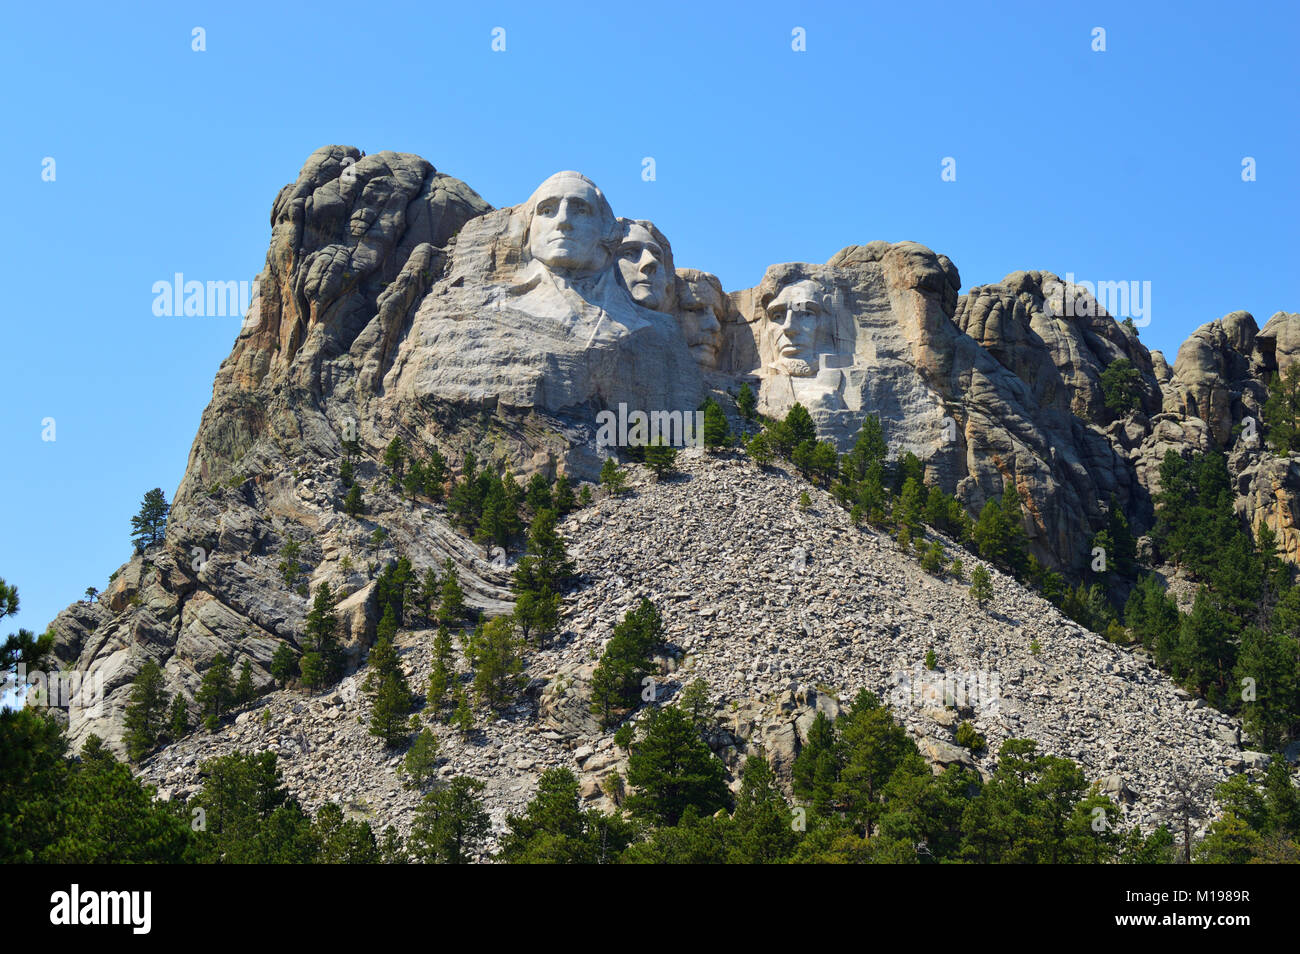 Wide Shot of the Mount Rushmore National Memorial on a Bright and Clear Day Stock Photo